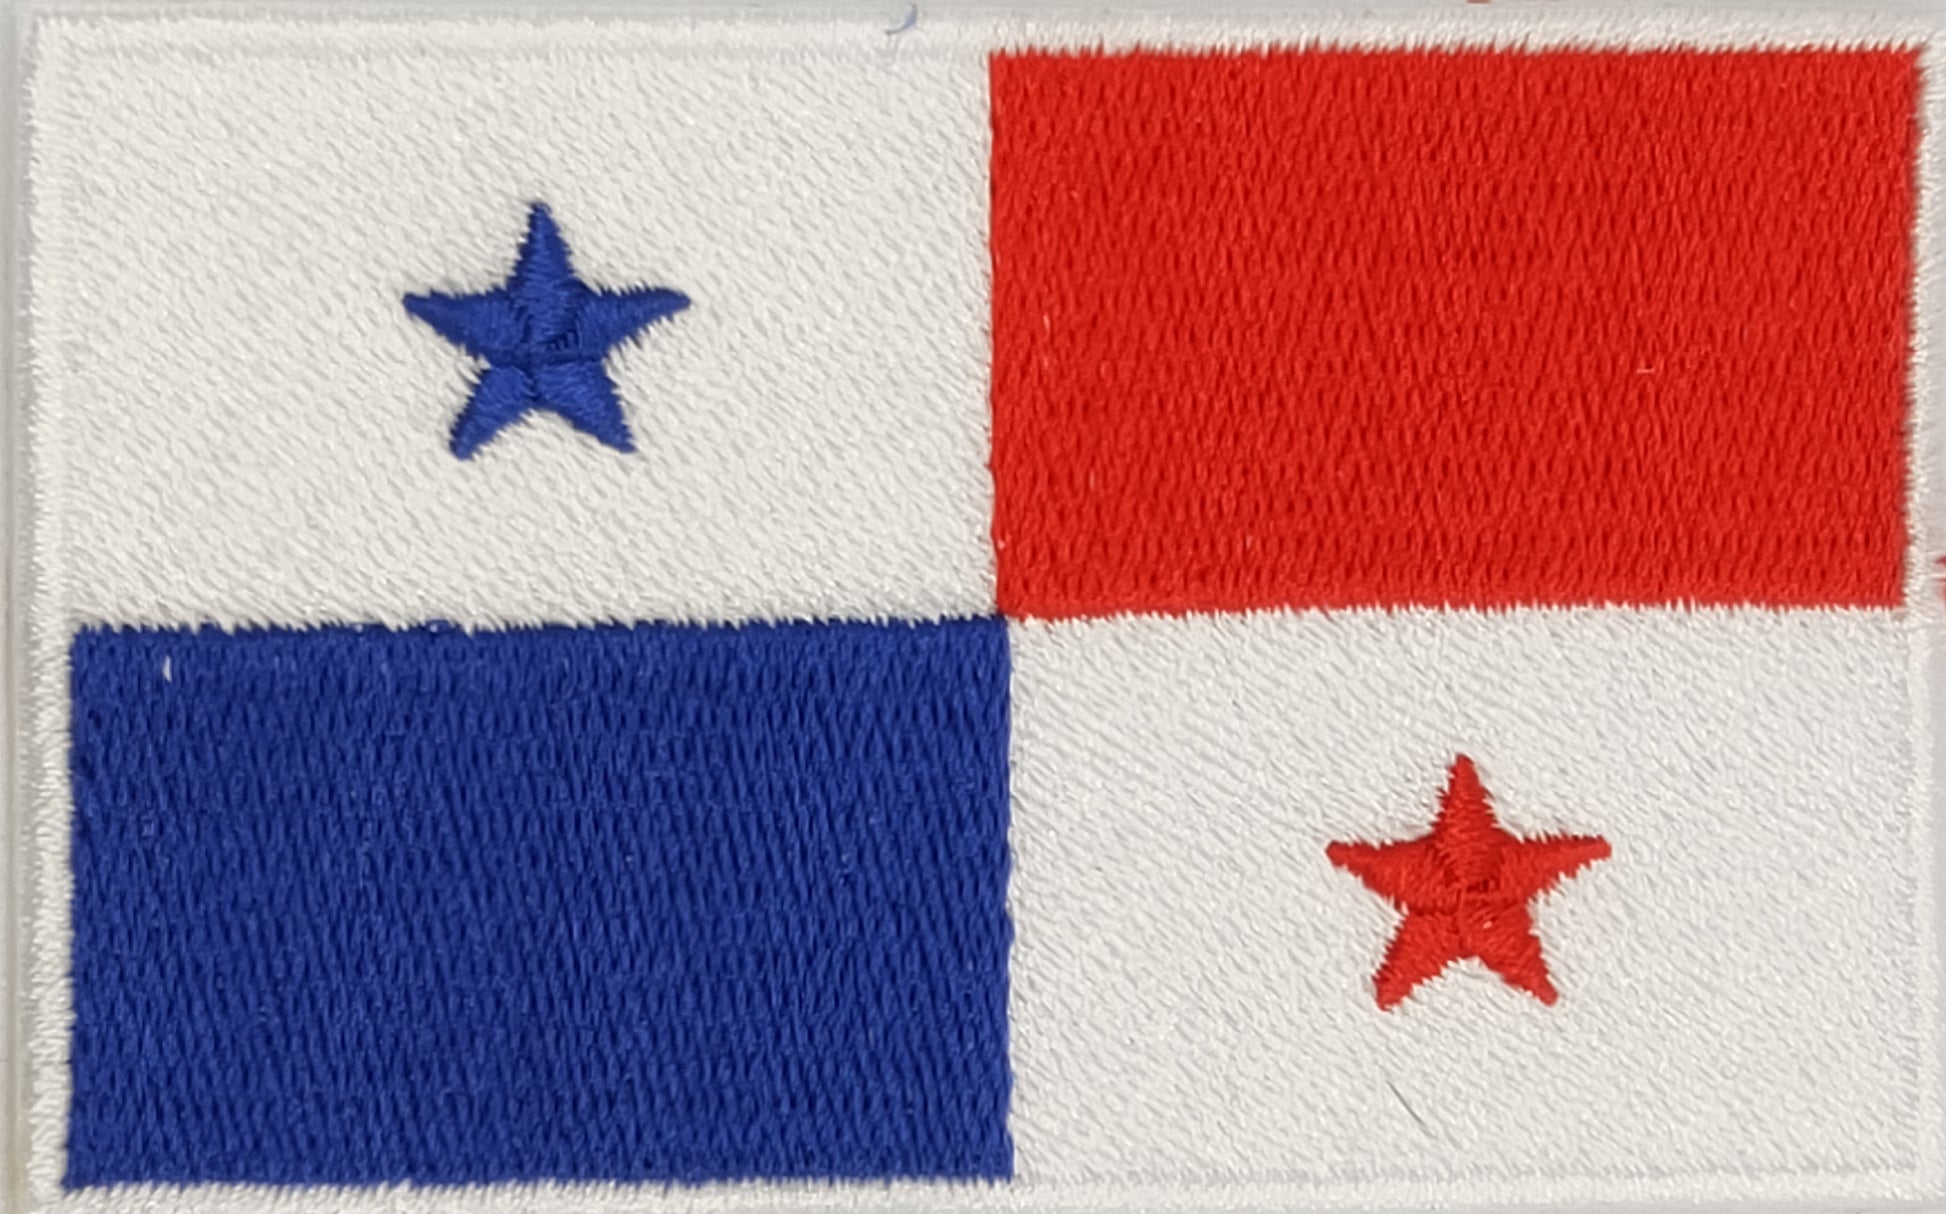 fully embroidered flag patch of panama made in new zealand